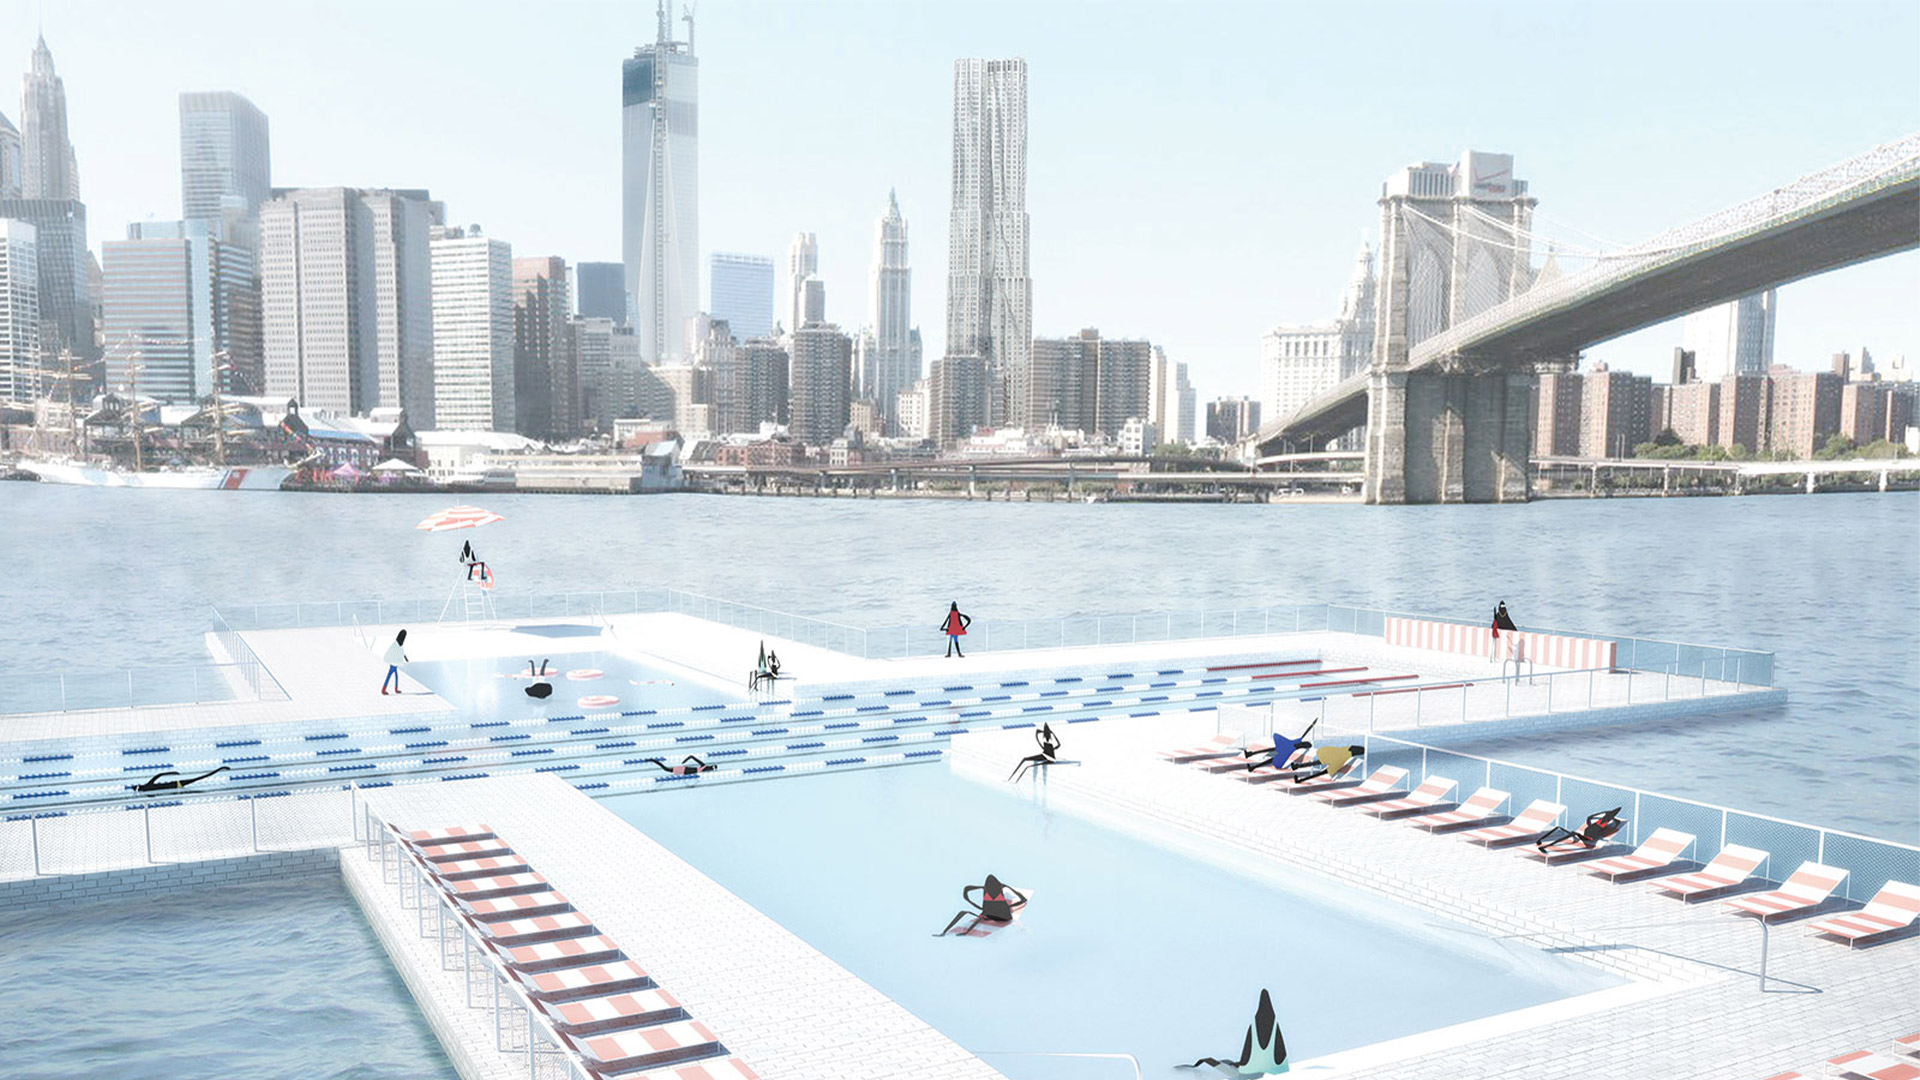 An enduring vision to construct an “iconic” floating pool in the shape of a plus symbol is one step closer. Proposed for East River in New York, the + POOL project has been given a "confirmation to proceed with due diligence” notice by the city and its Economic Development Corporation. Friends of + POOL, the non-profit organisation behind the development, has been seeking access to an area of the river to anchor the swimming pool for over a decade. This recent announcement provides official confirmation for organisers to proceed with next steps in the waters located in the Two Bridges neighbourhood of Lower Manhattan, north of Manhattan Bridge.